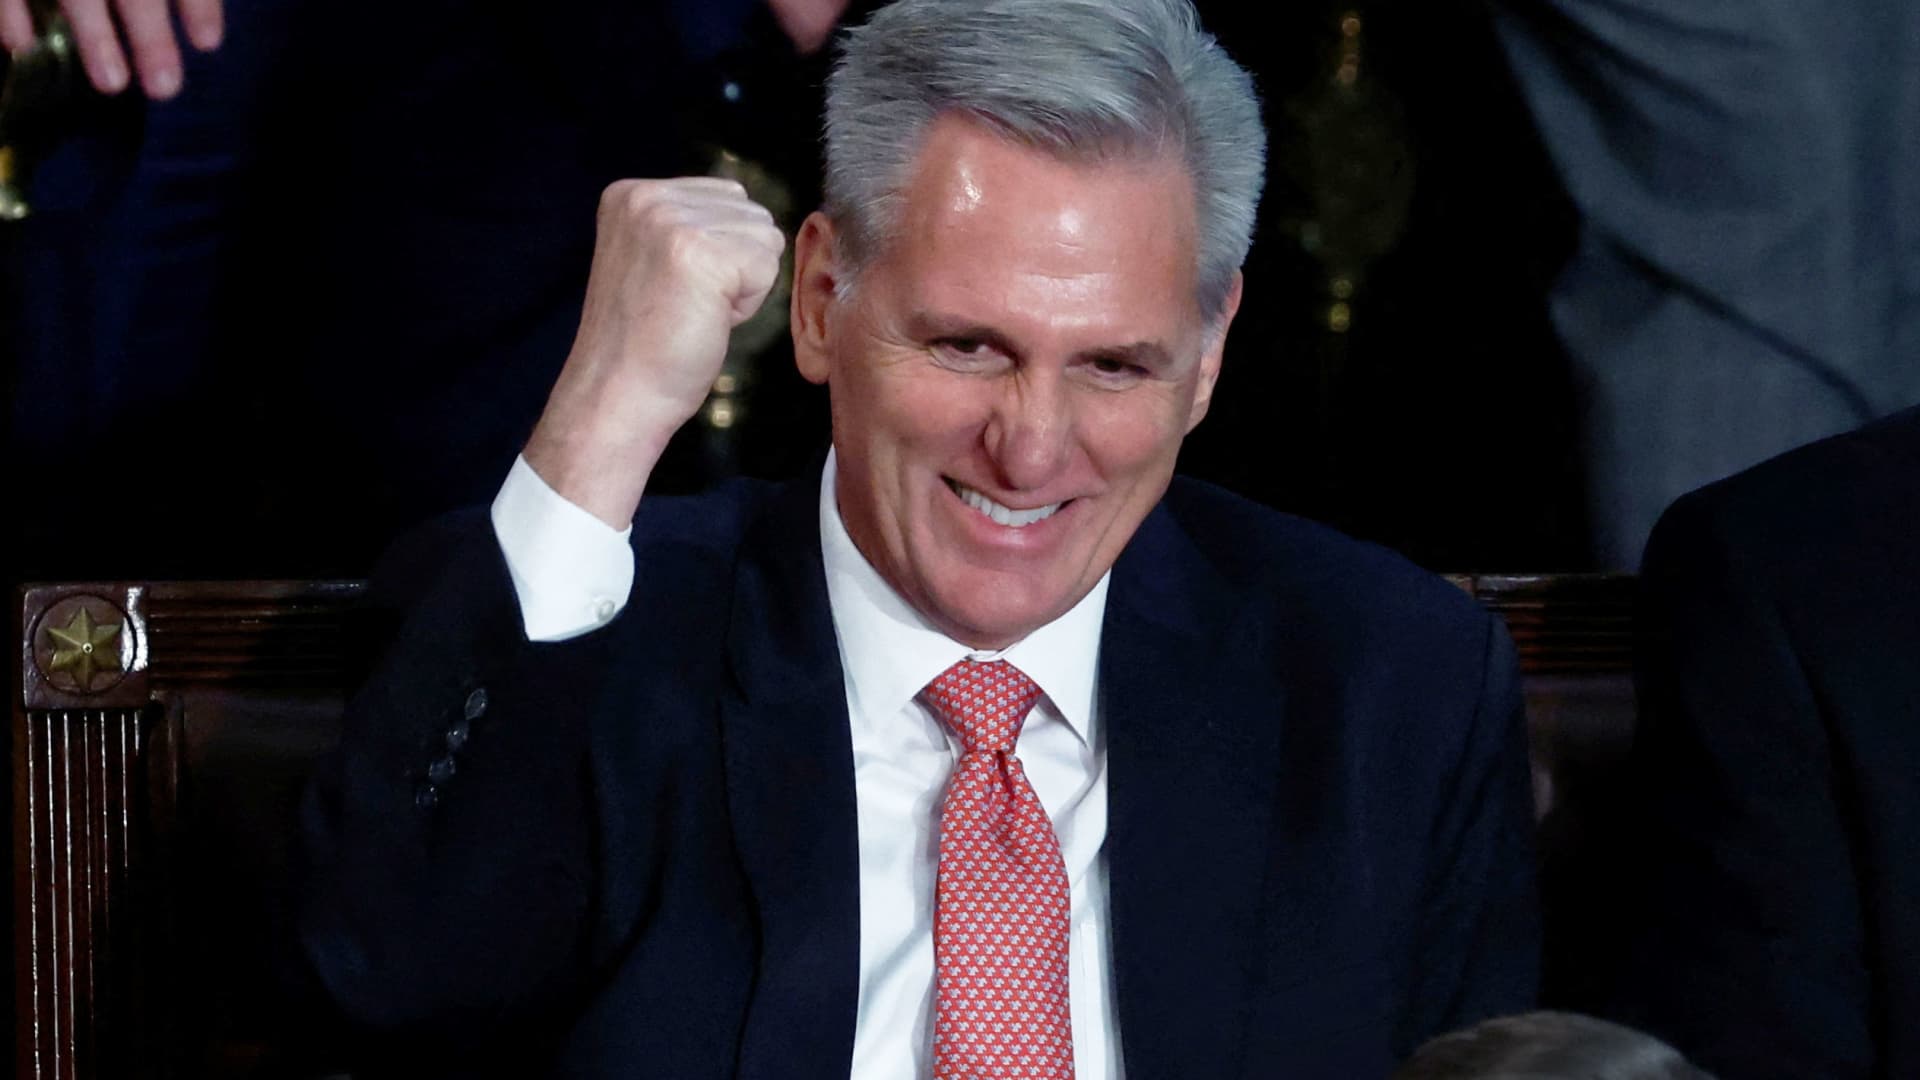 House Republican Leader Kevin McCarthy (R-CA) pumps his fist after voting for himself for the 9th time during a 9th round of voting in the election of a new Speaker of the House on the third day of the 118th Congress at the U.S. Capitol in Washington, January 5, 2023.